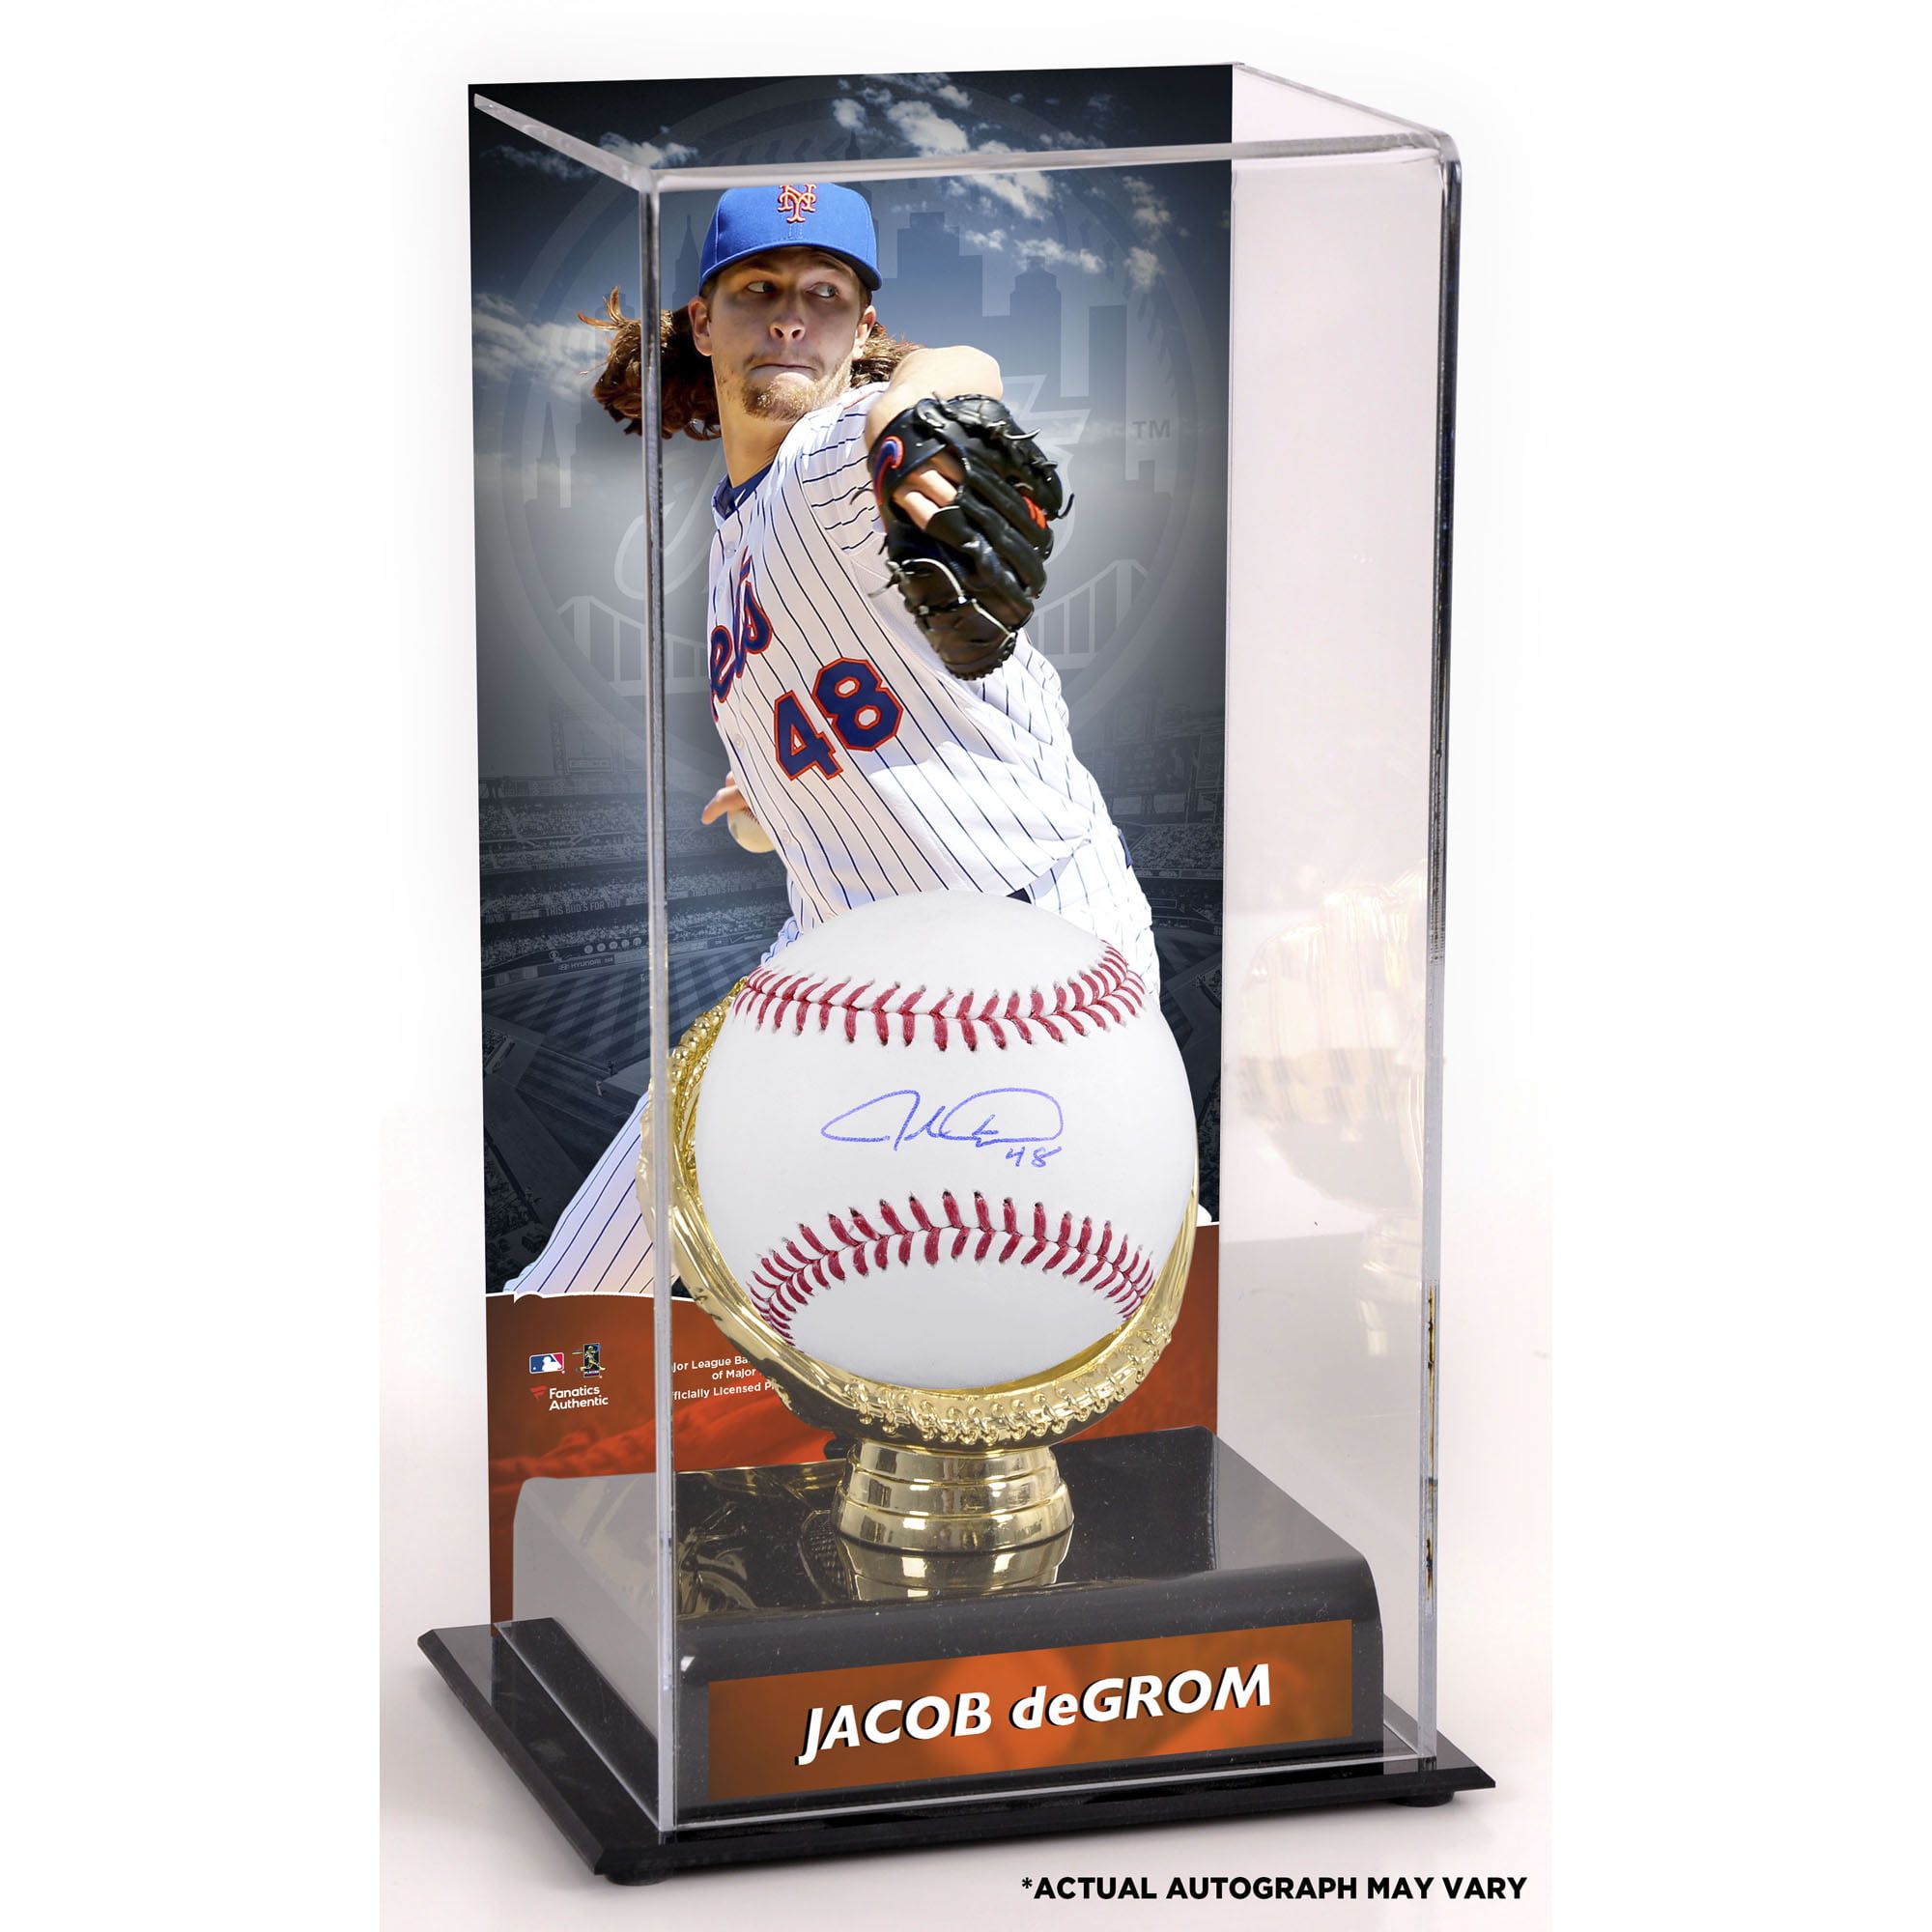 Jacob deGrom New York Mets Autographed Baseball Autographed Baseballs Fanatics Authentic Certified 